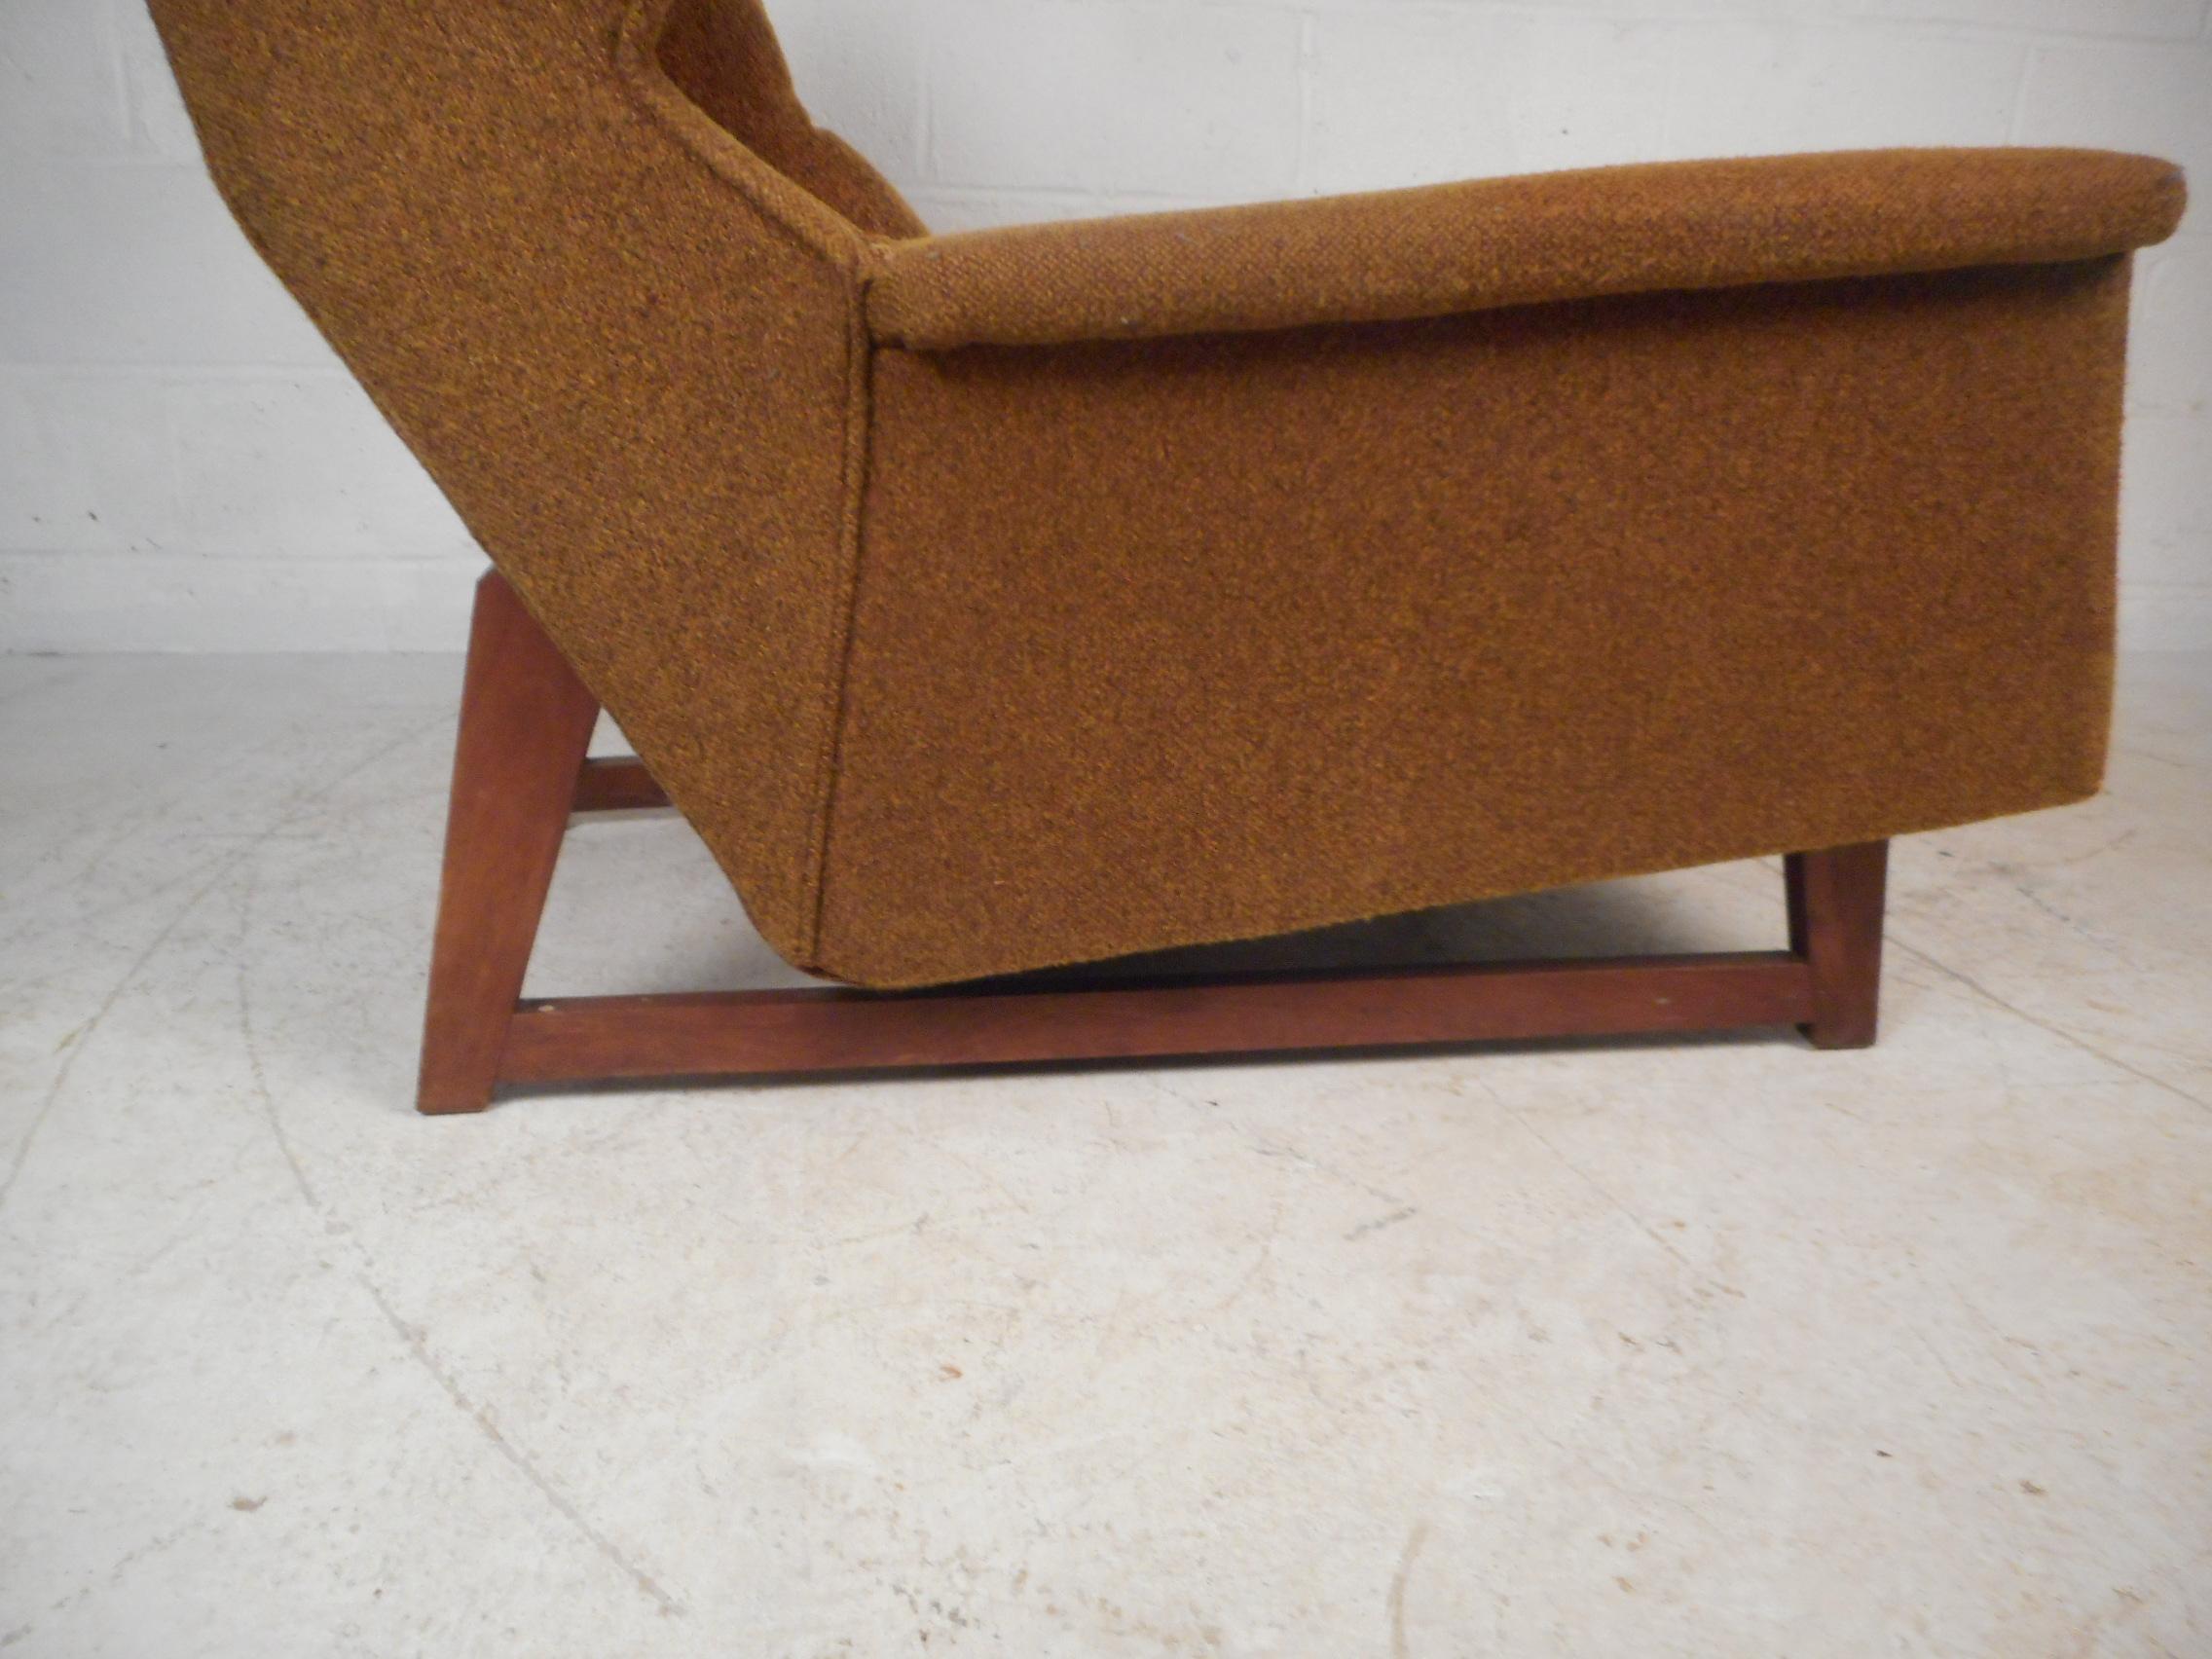 Upholstery Midcentury Adrian Pearsall Style Lounge Chair and Ottoman by Weiland